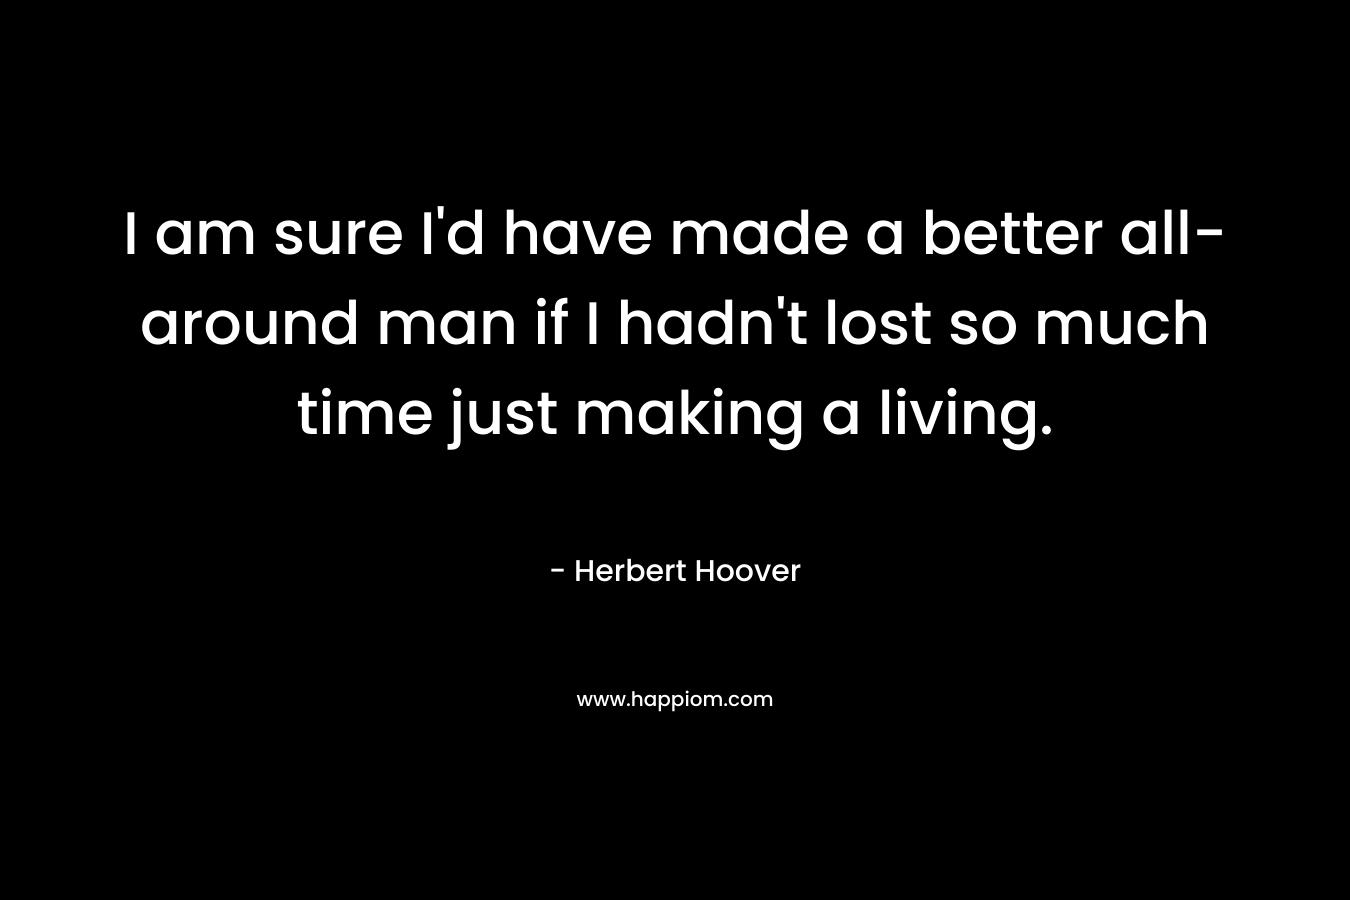 I am sure I'd have made a better all-around man if I hadn't lost so much time just making a living.